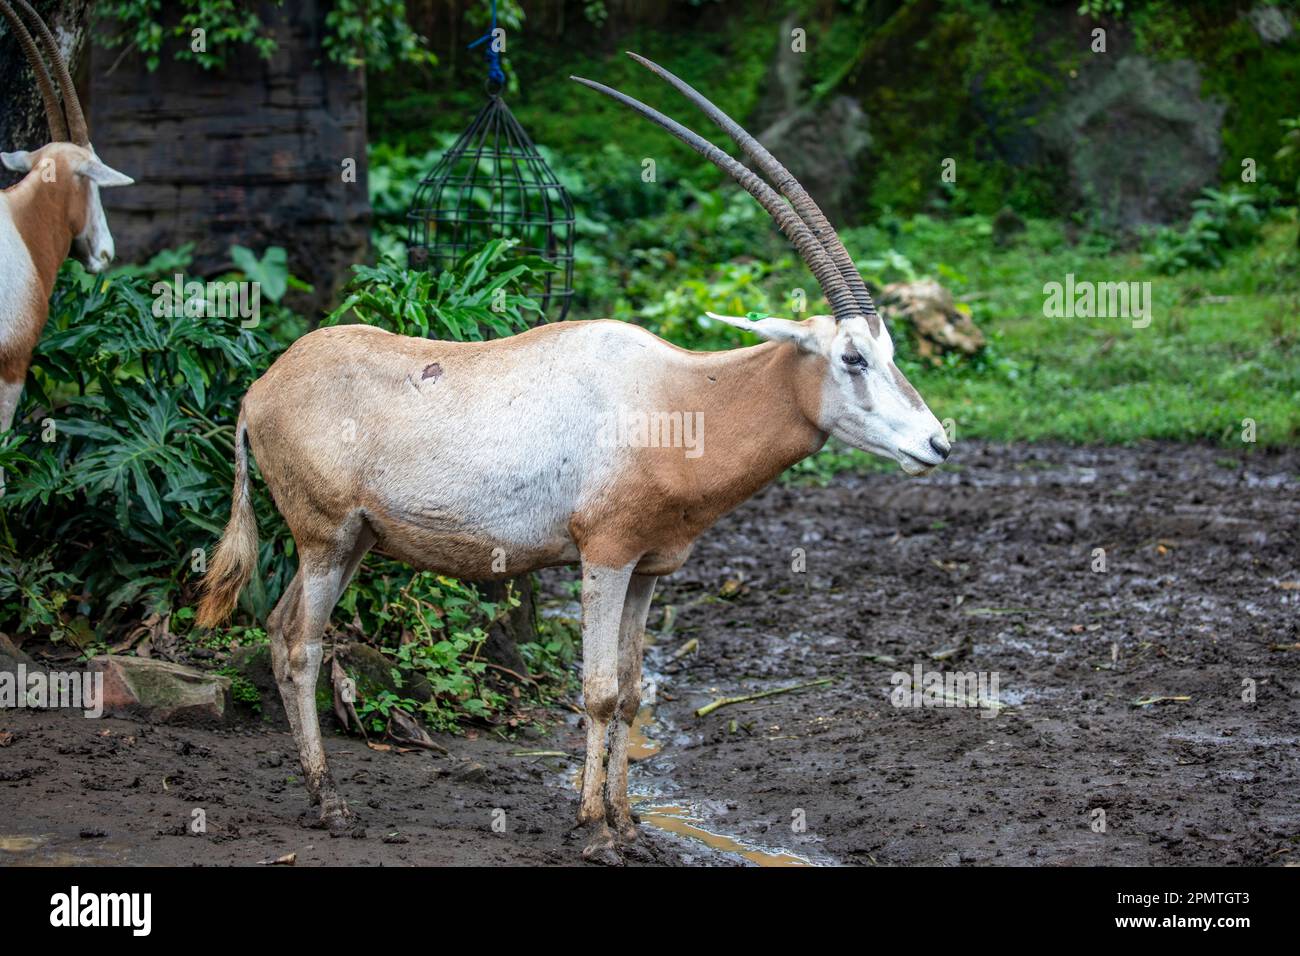 Scimitar oryx is a species of Oryx once widespread across North Africa which went extinct in the wild in 2000. It is a straight-horned antelope. Stock Photo